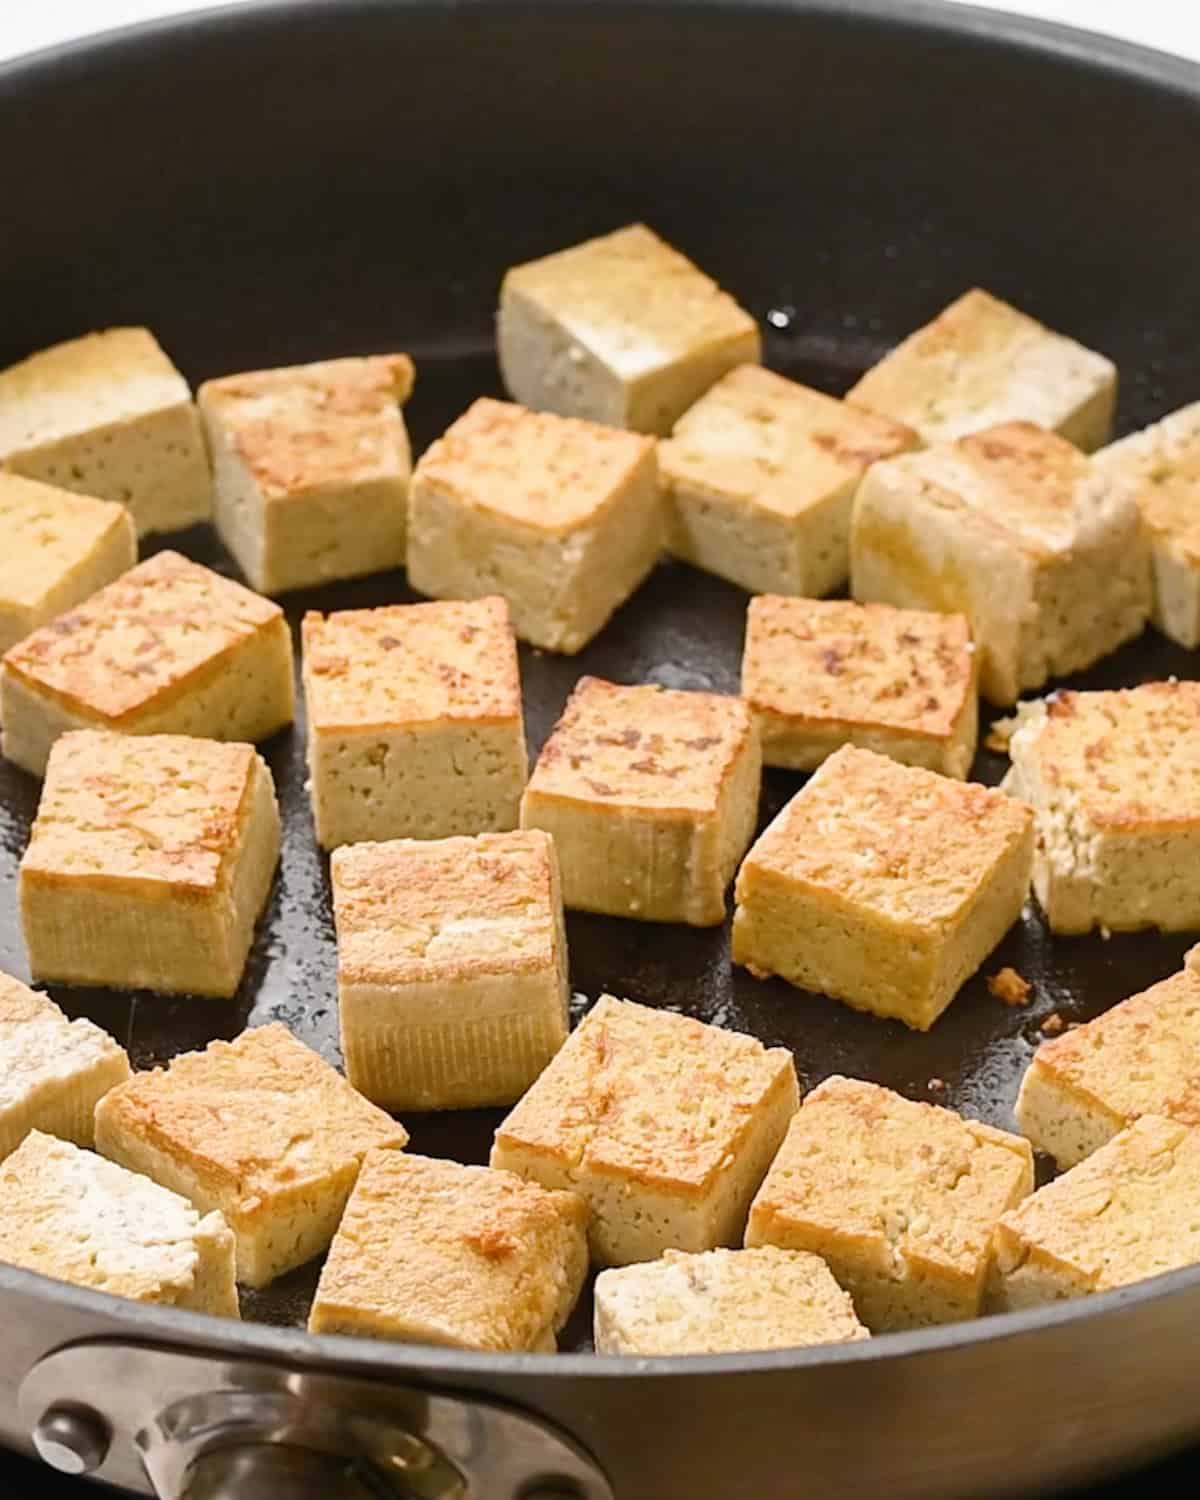 golden-brown tofu after cooking in oil. 